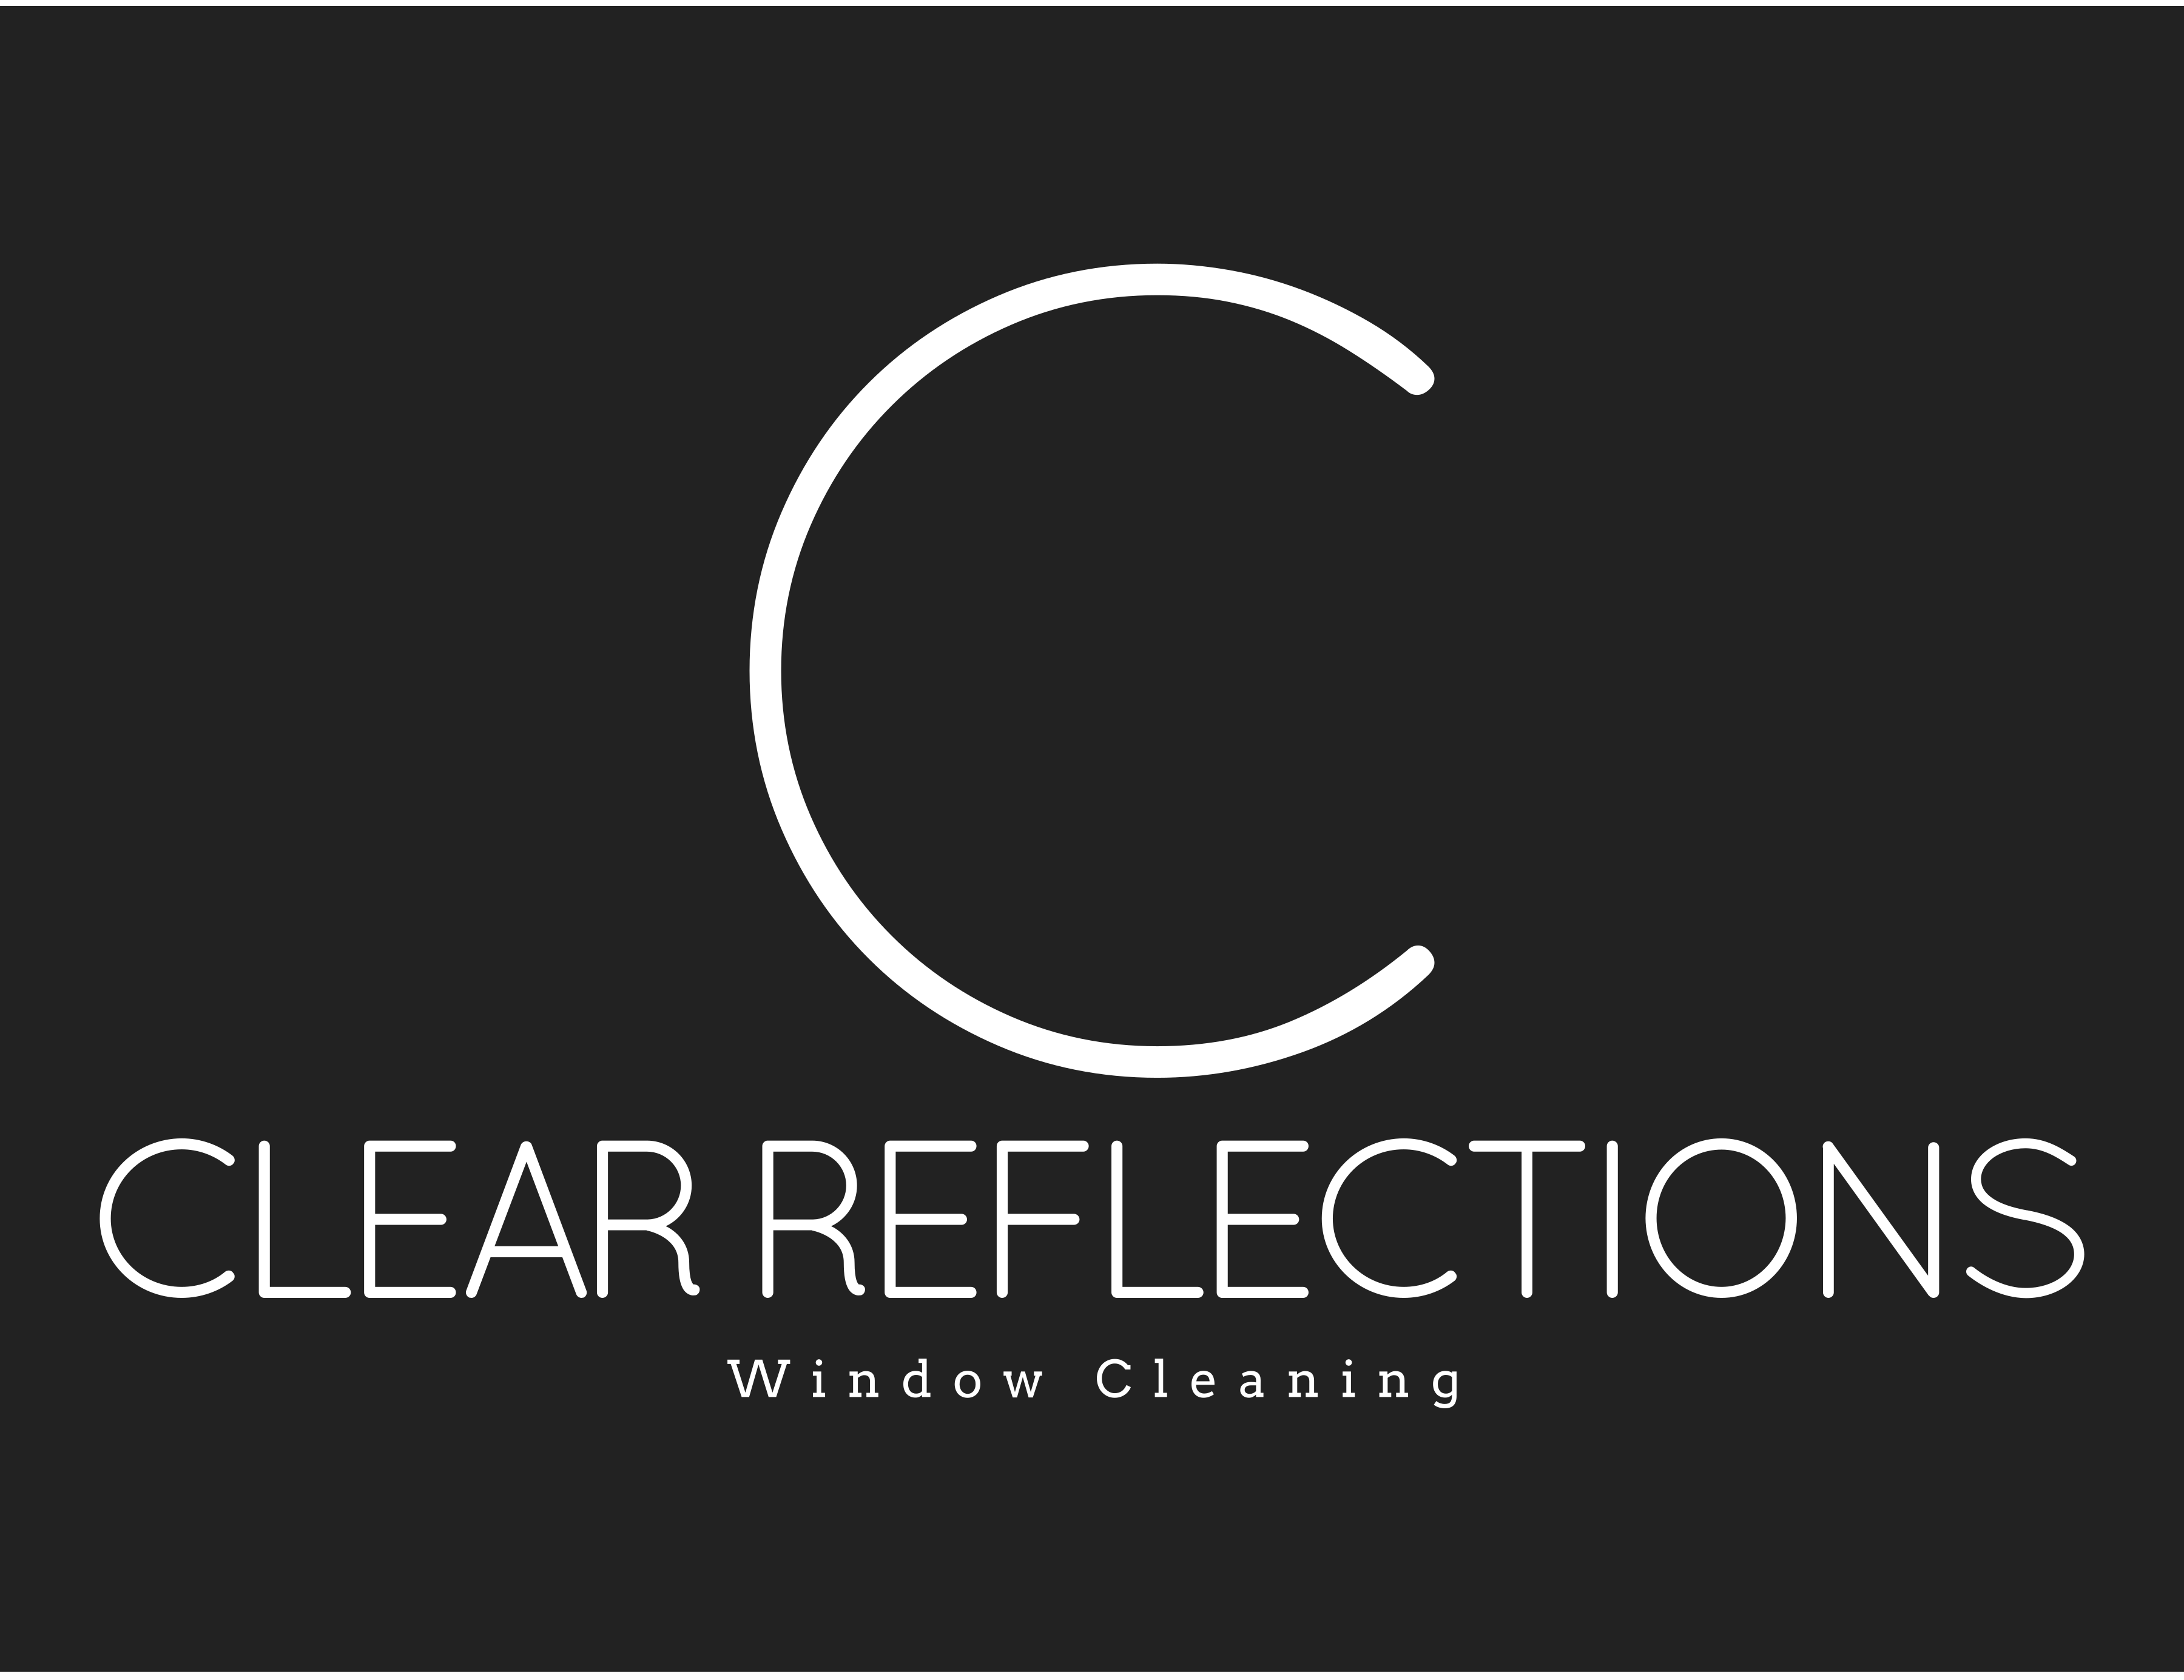 Reflections Logo - Clear Reflections logo